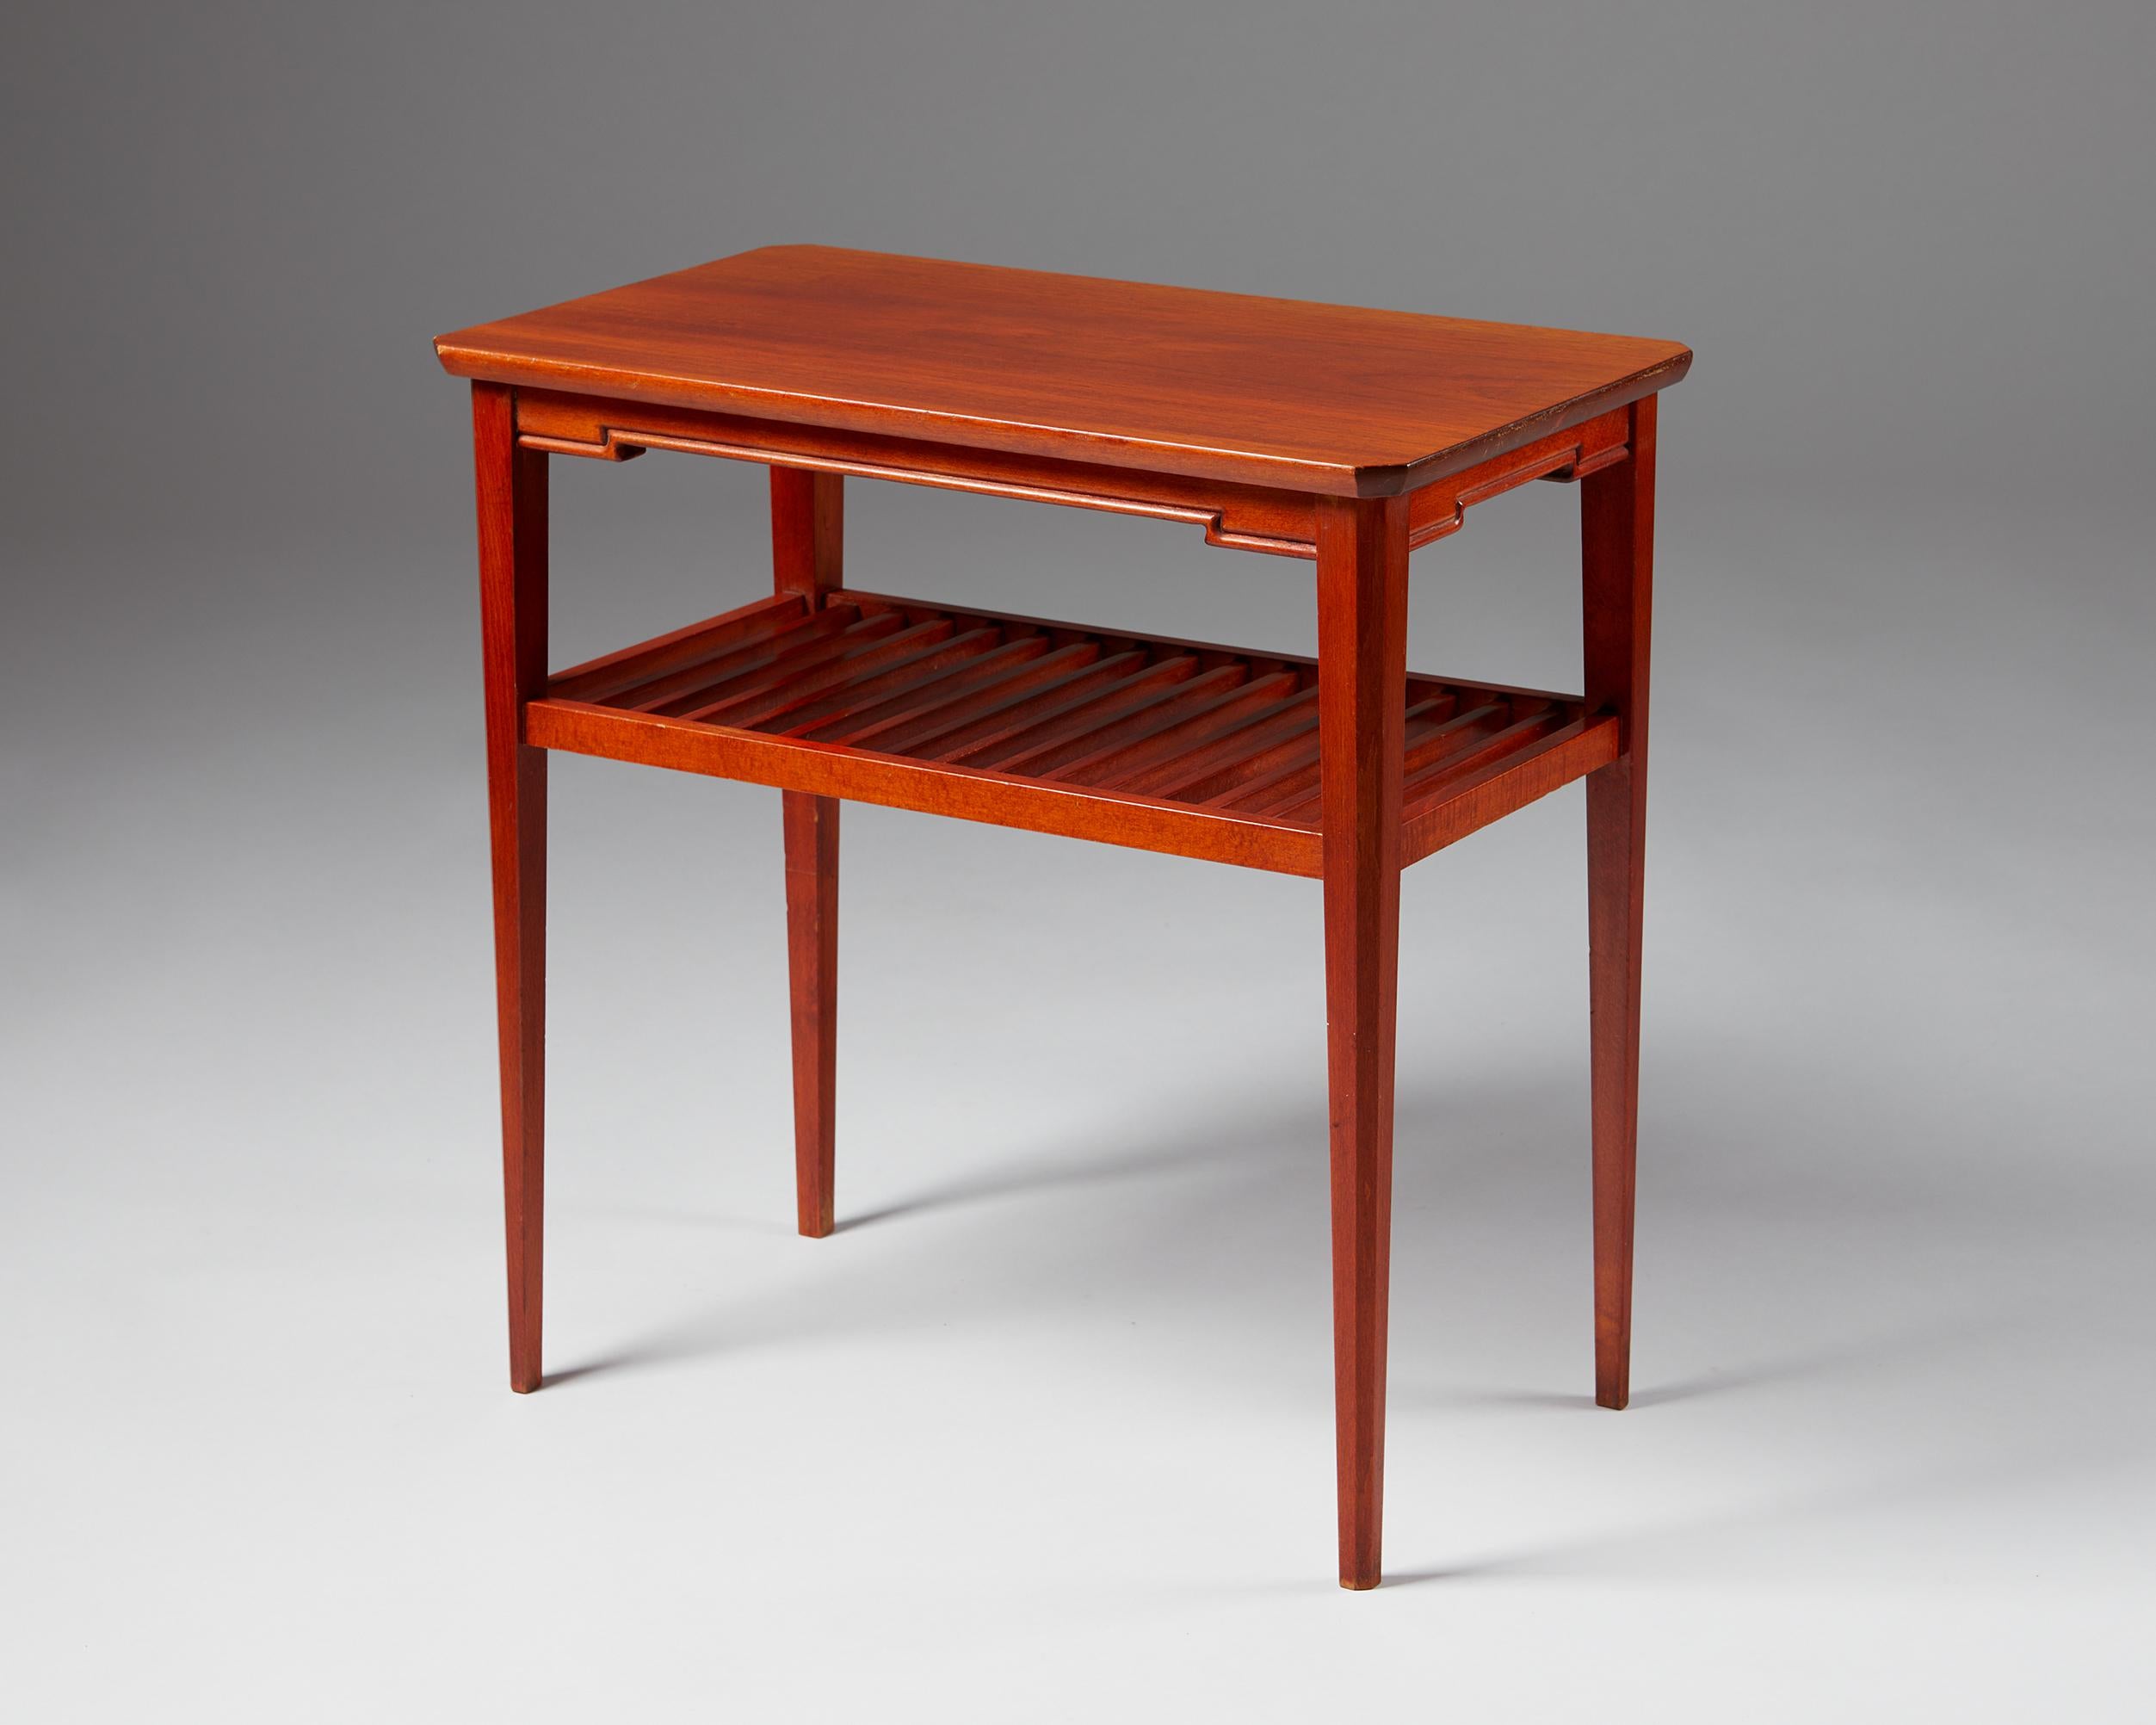 Occasional table, anonymous,
Sweden. 1940s.

Mahogany.

Dimensions: 
H: 60.5 cm / 23 3/4